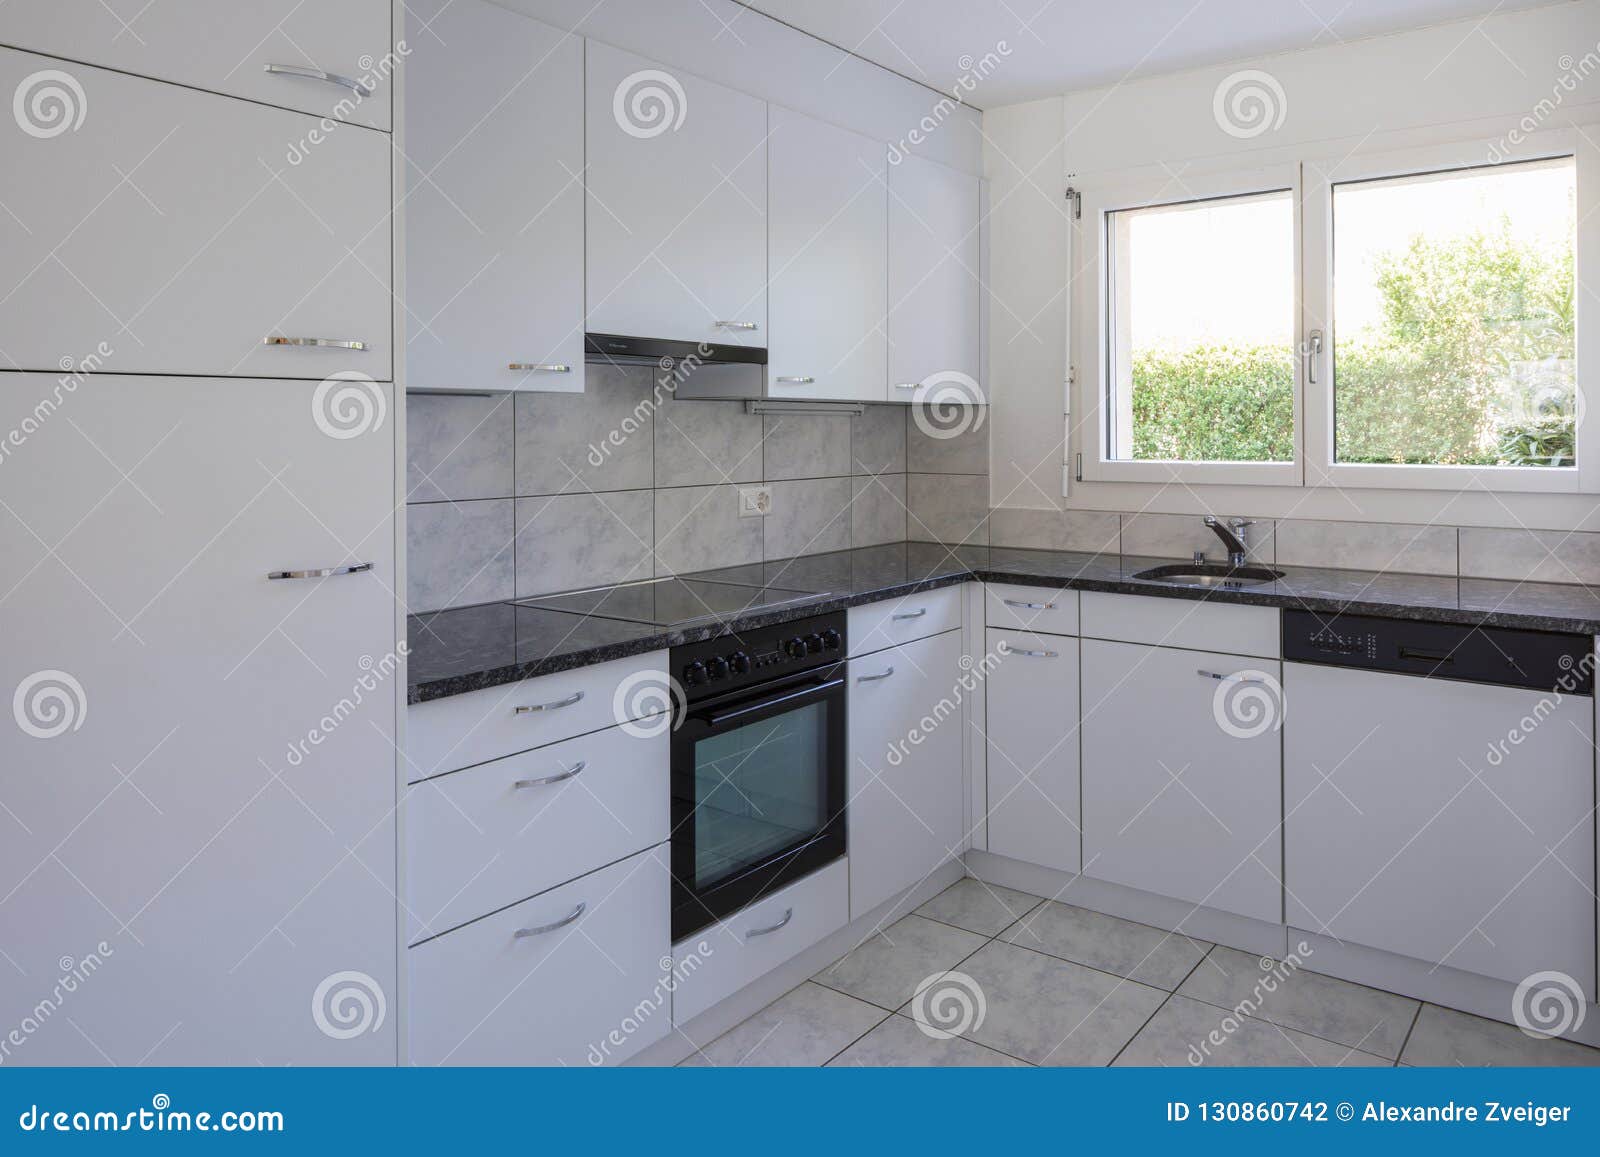 Vintage White Kitchen With Large Tiles Stock Photo Image Of Inside